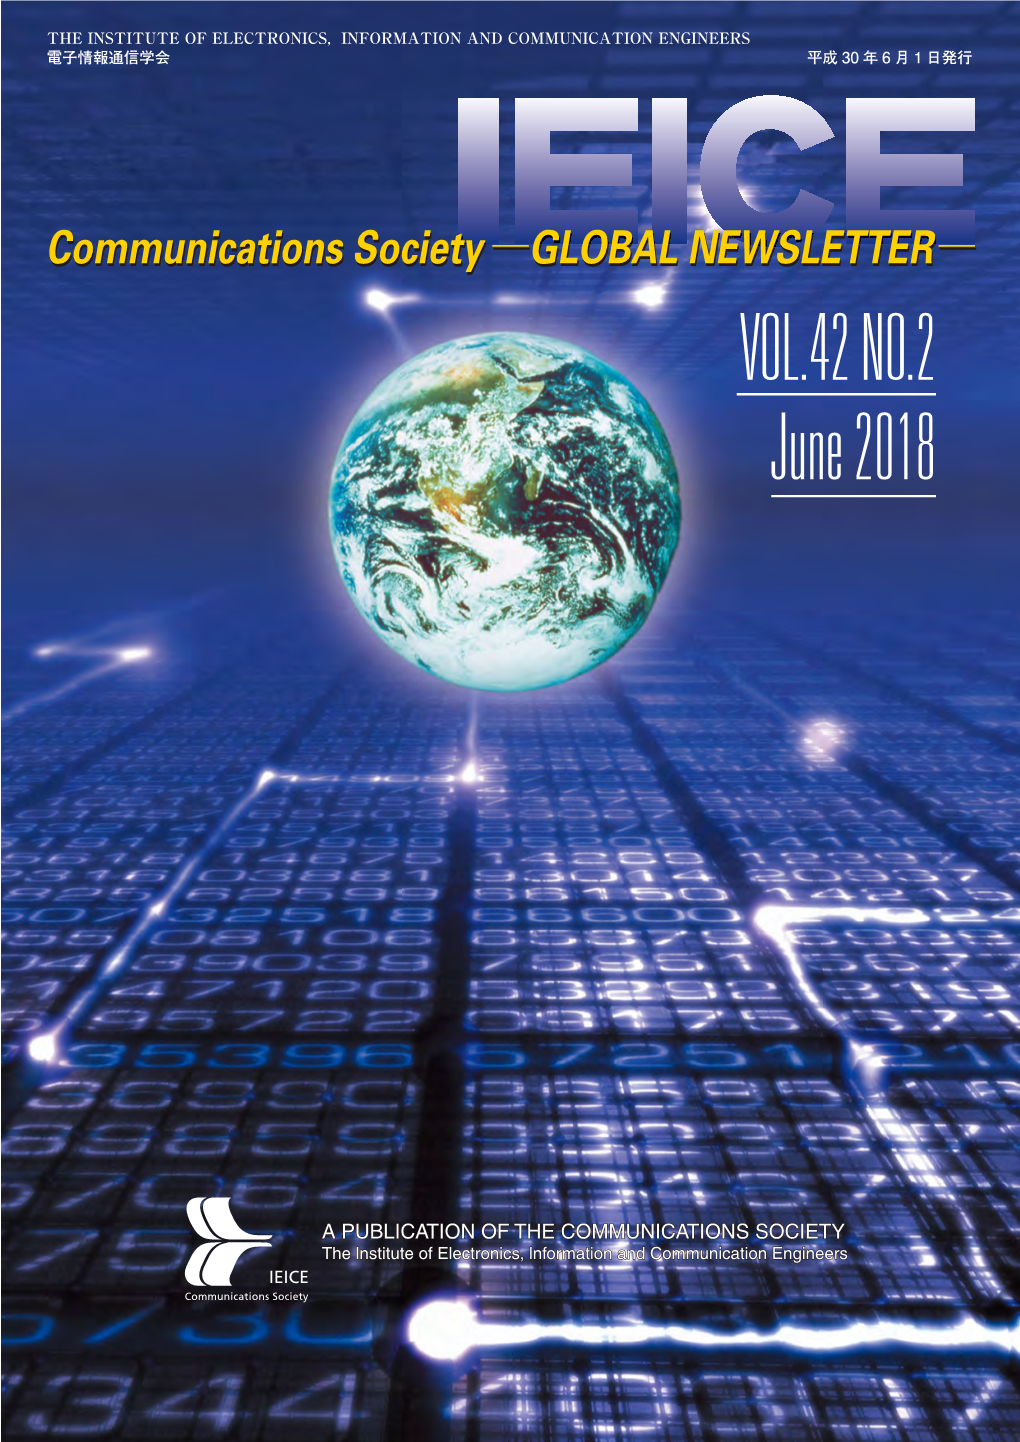 VOL.42 NO.2 June 2018 [Contents] IEICE Communications Society – GLOBAL NEWSLETTER Vol